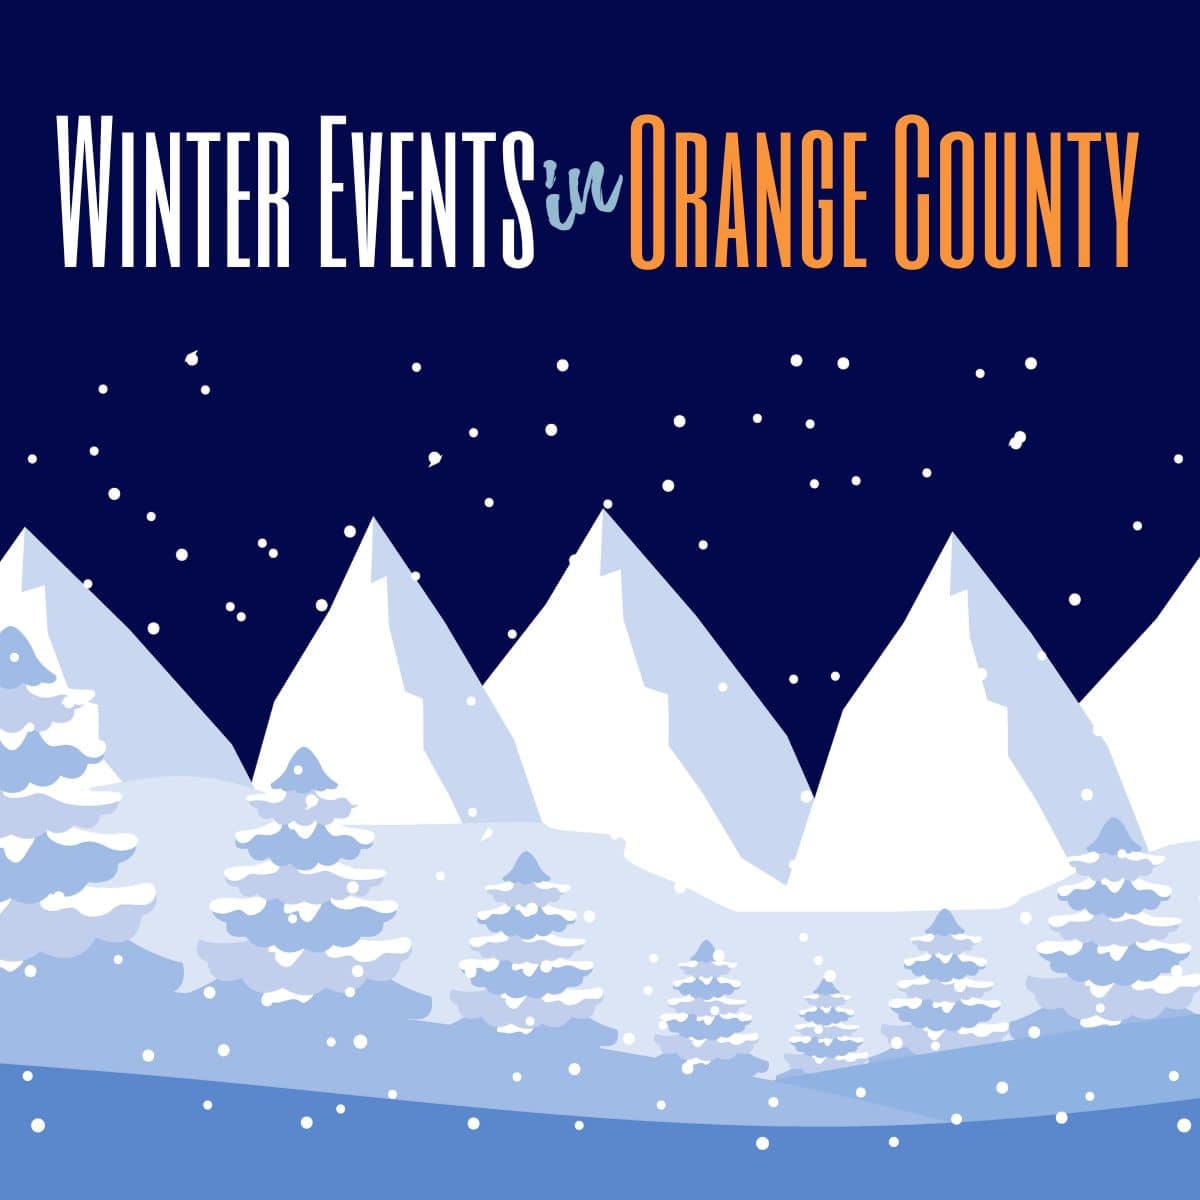 Winter Holiday Events In Orange County